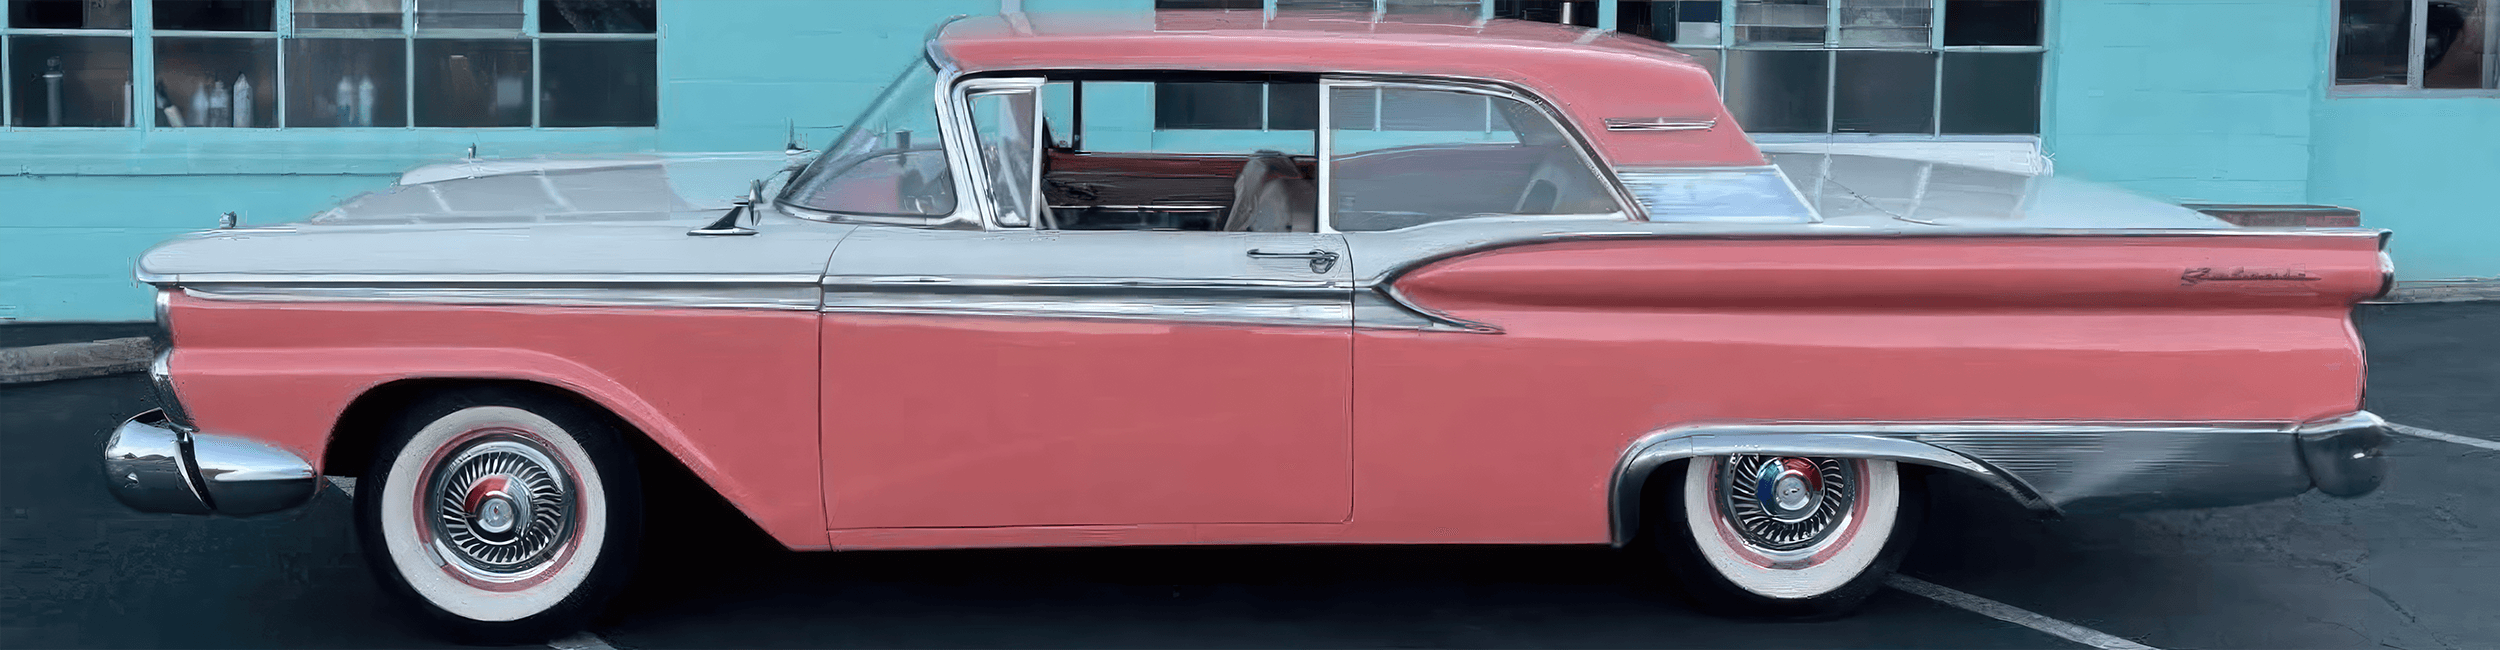 1959 Ford Galaxy powered by a BluePrint Engines' 347 c.i.